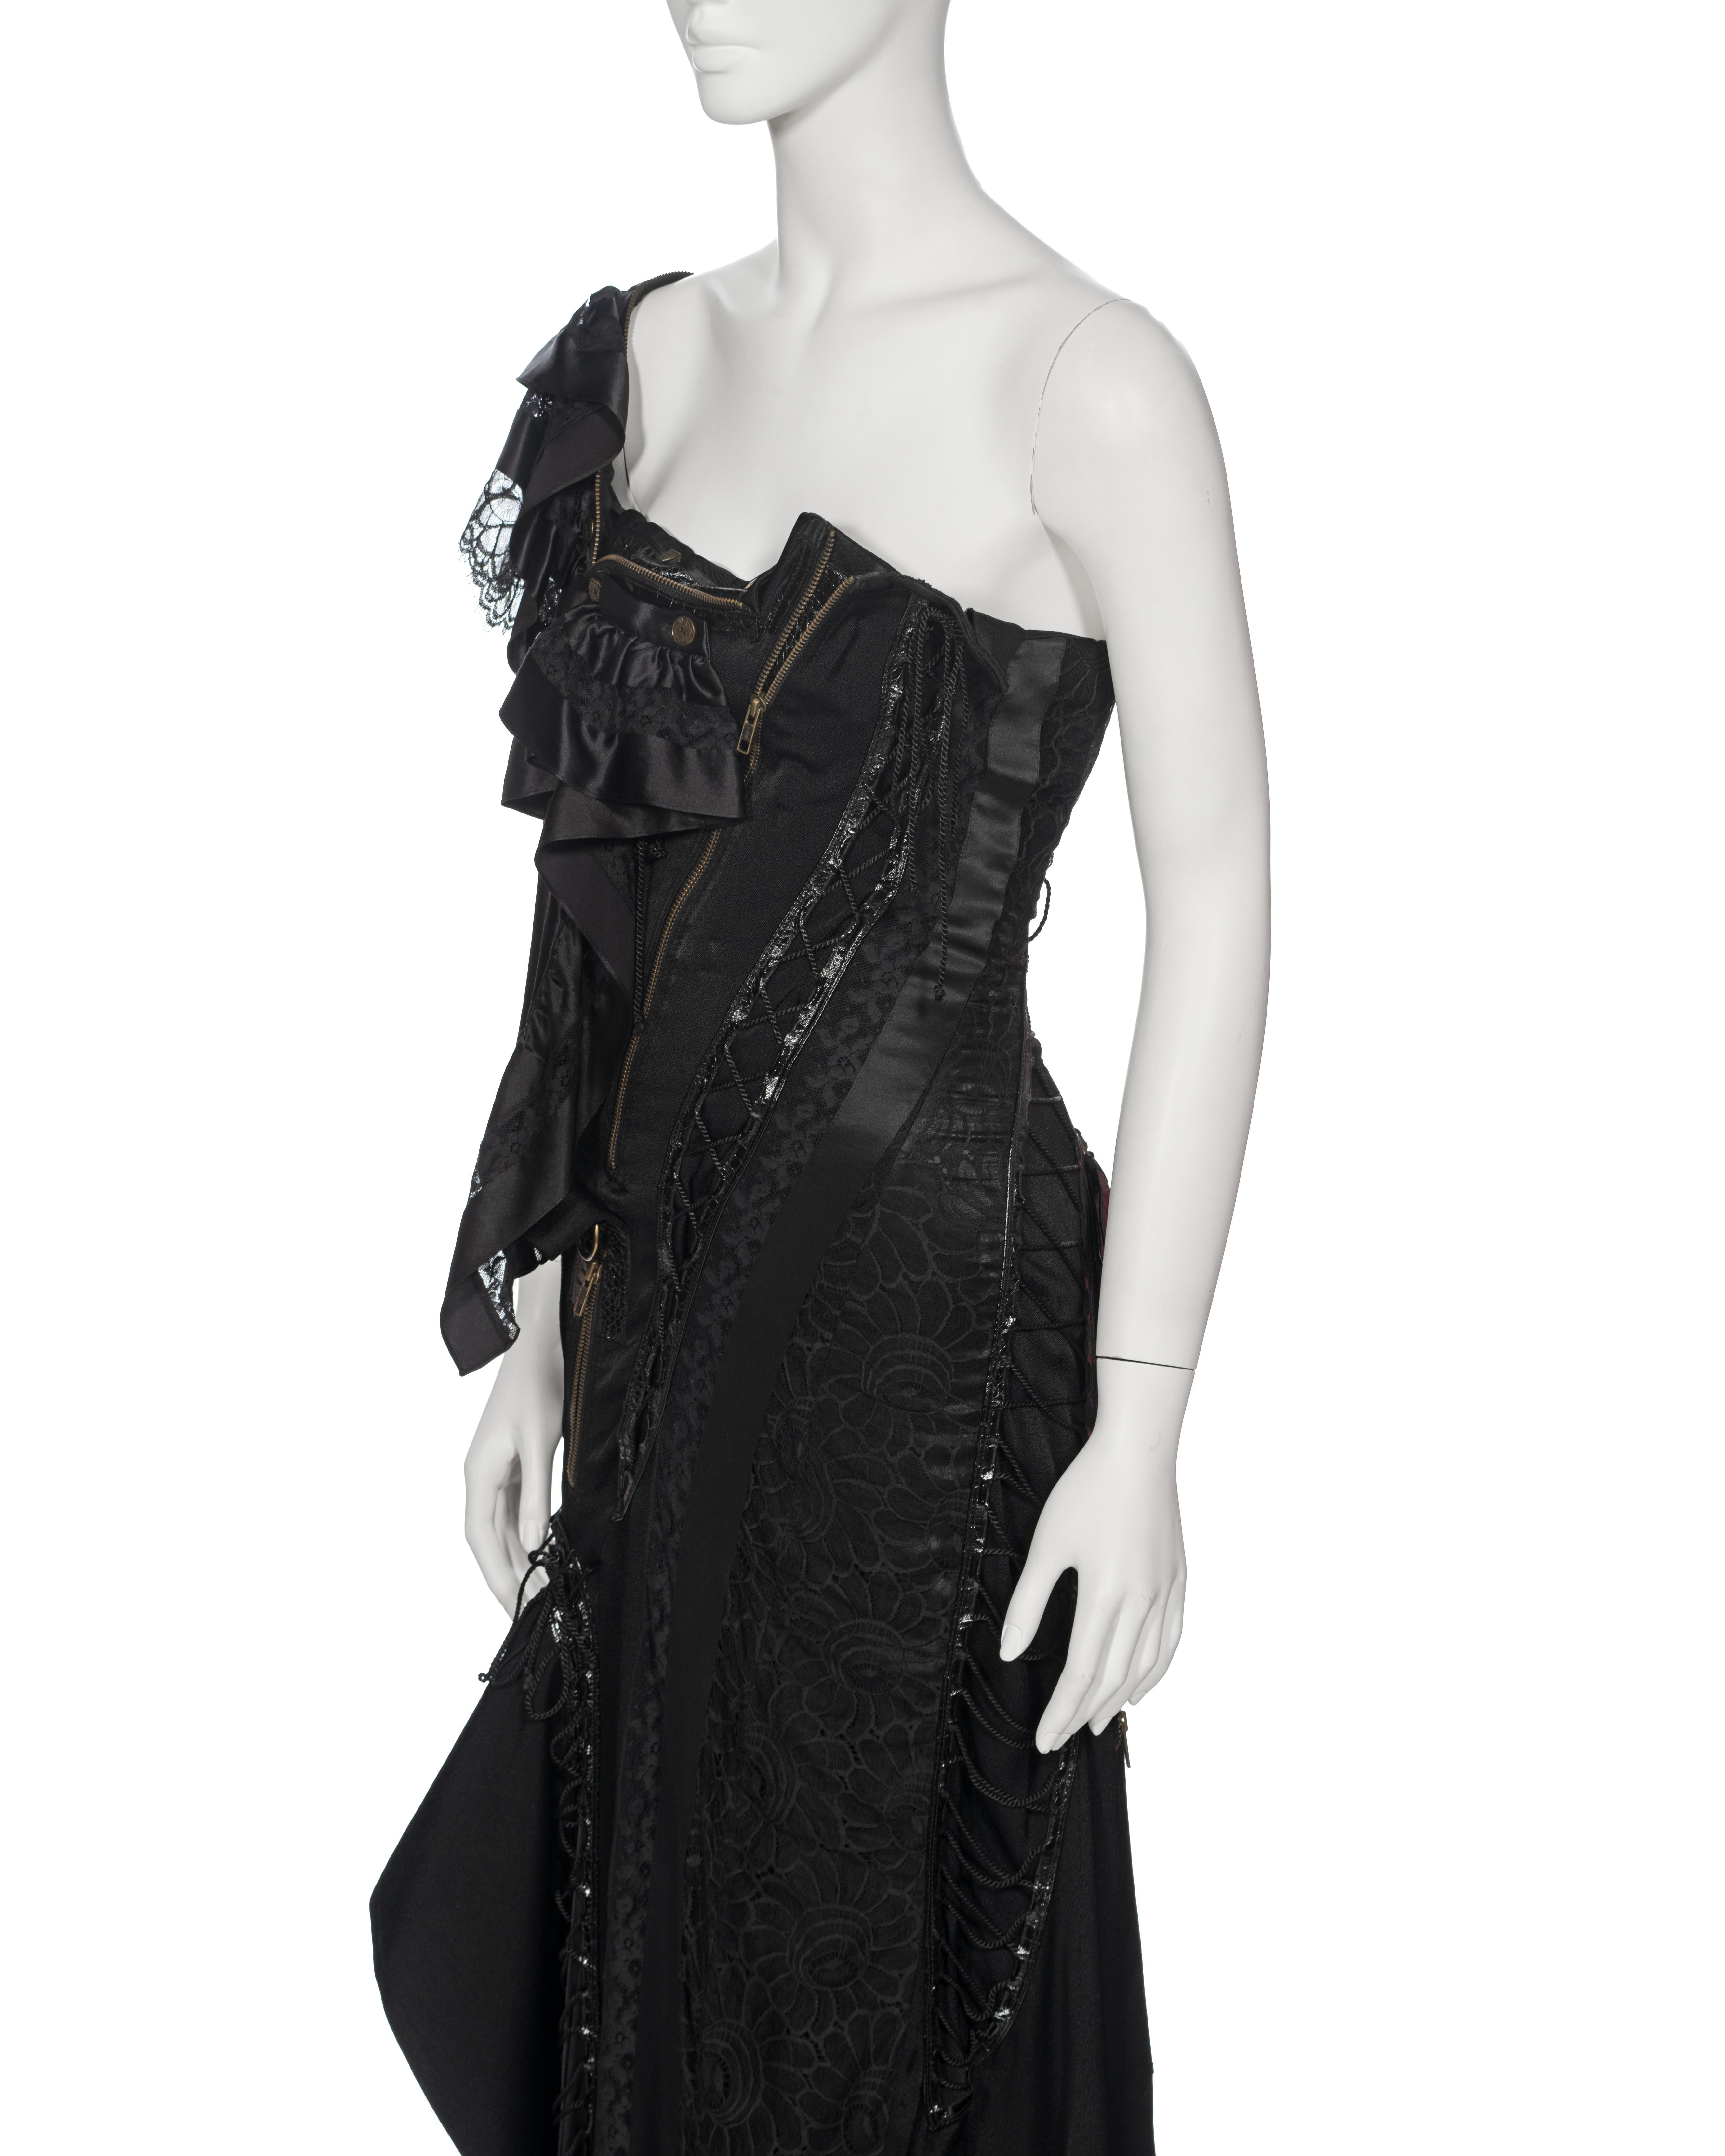 John Galliano Black Deconstructed Silk and Lace Evening Dress, ss 2002 For Sale 9